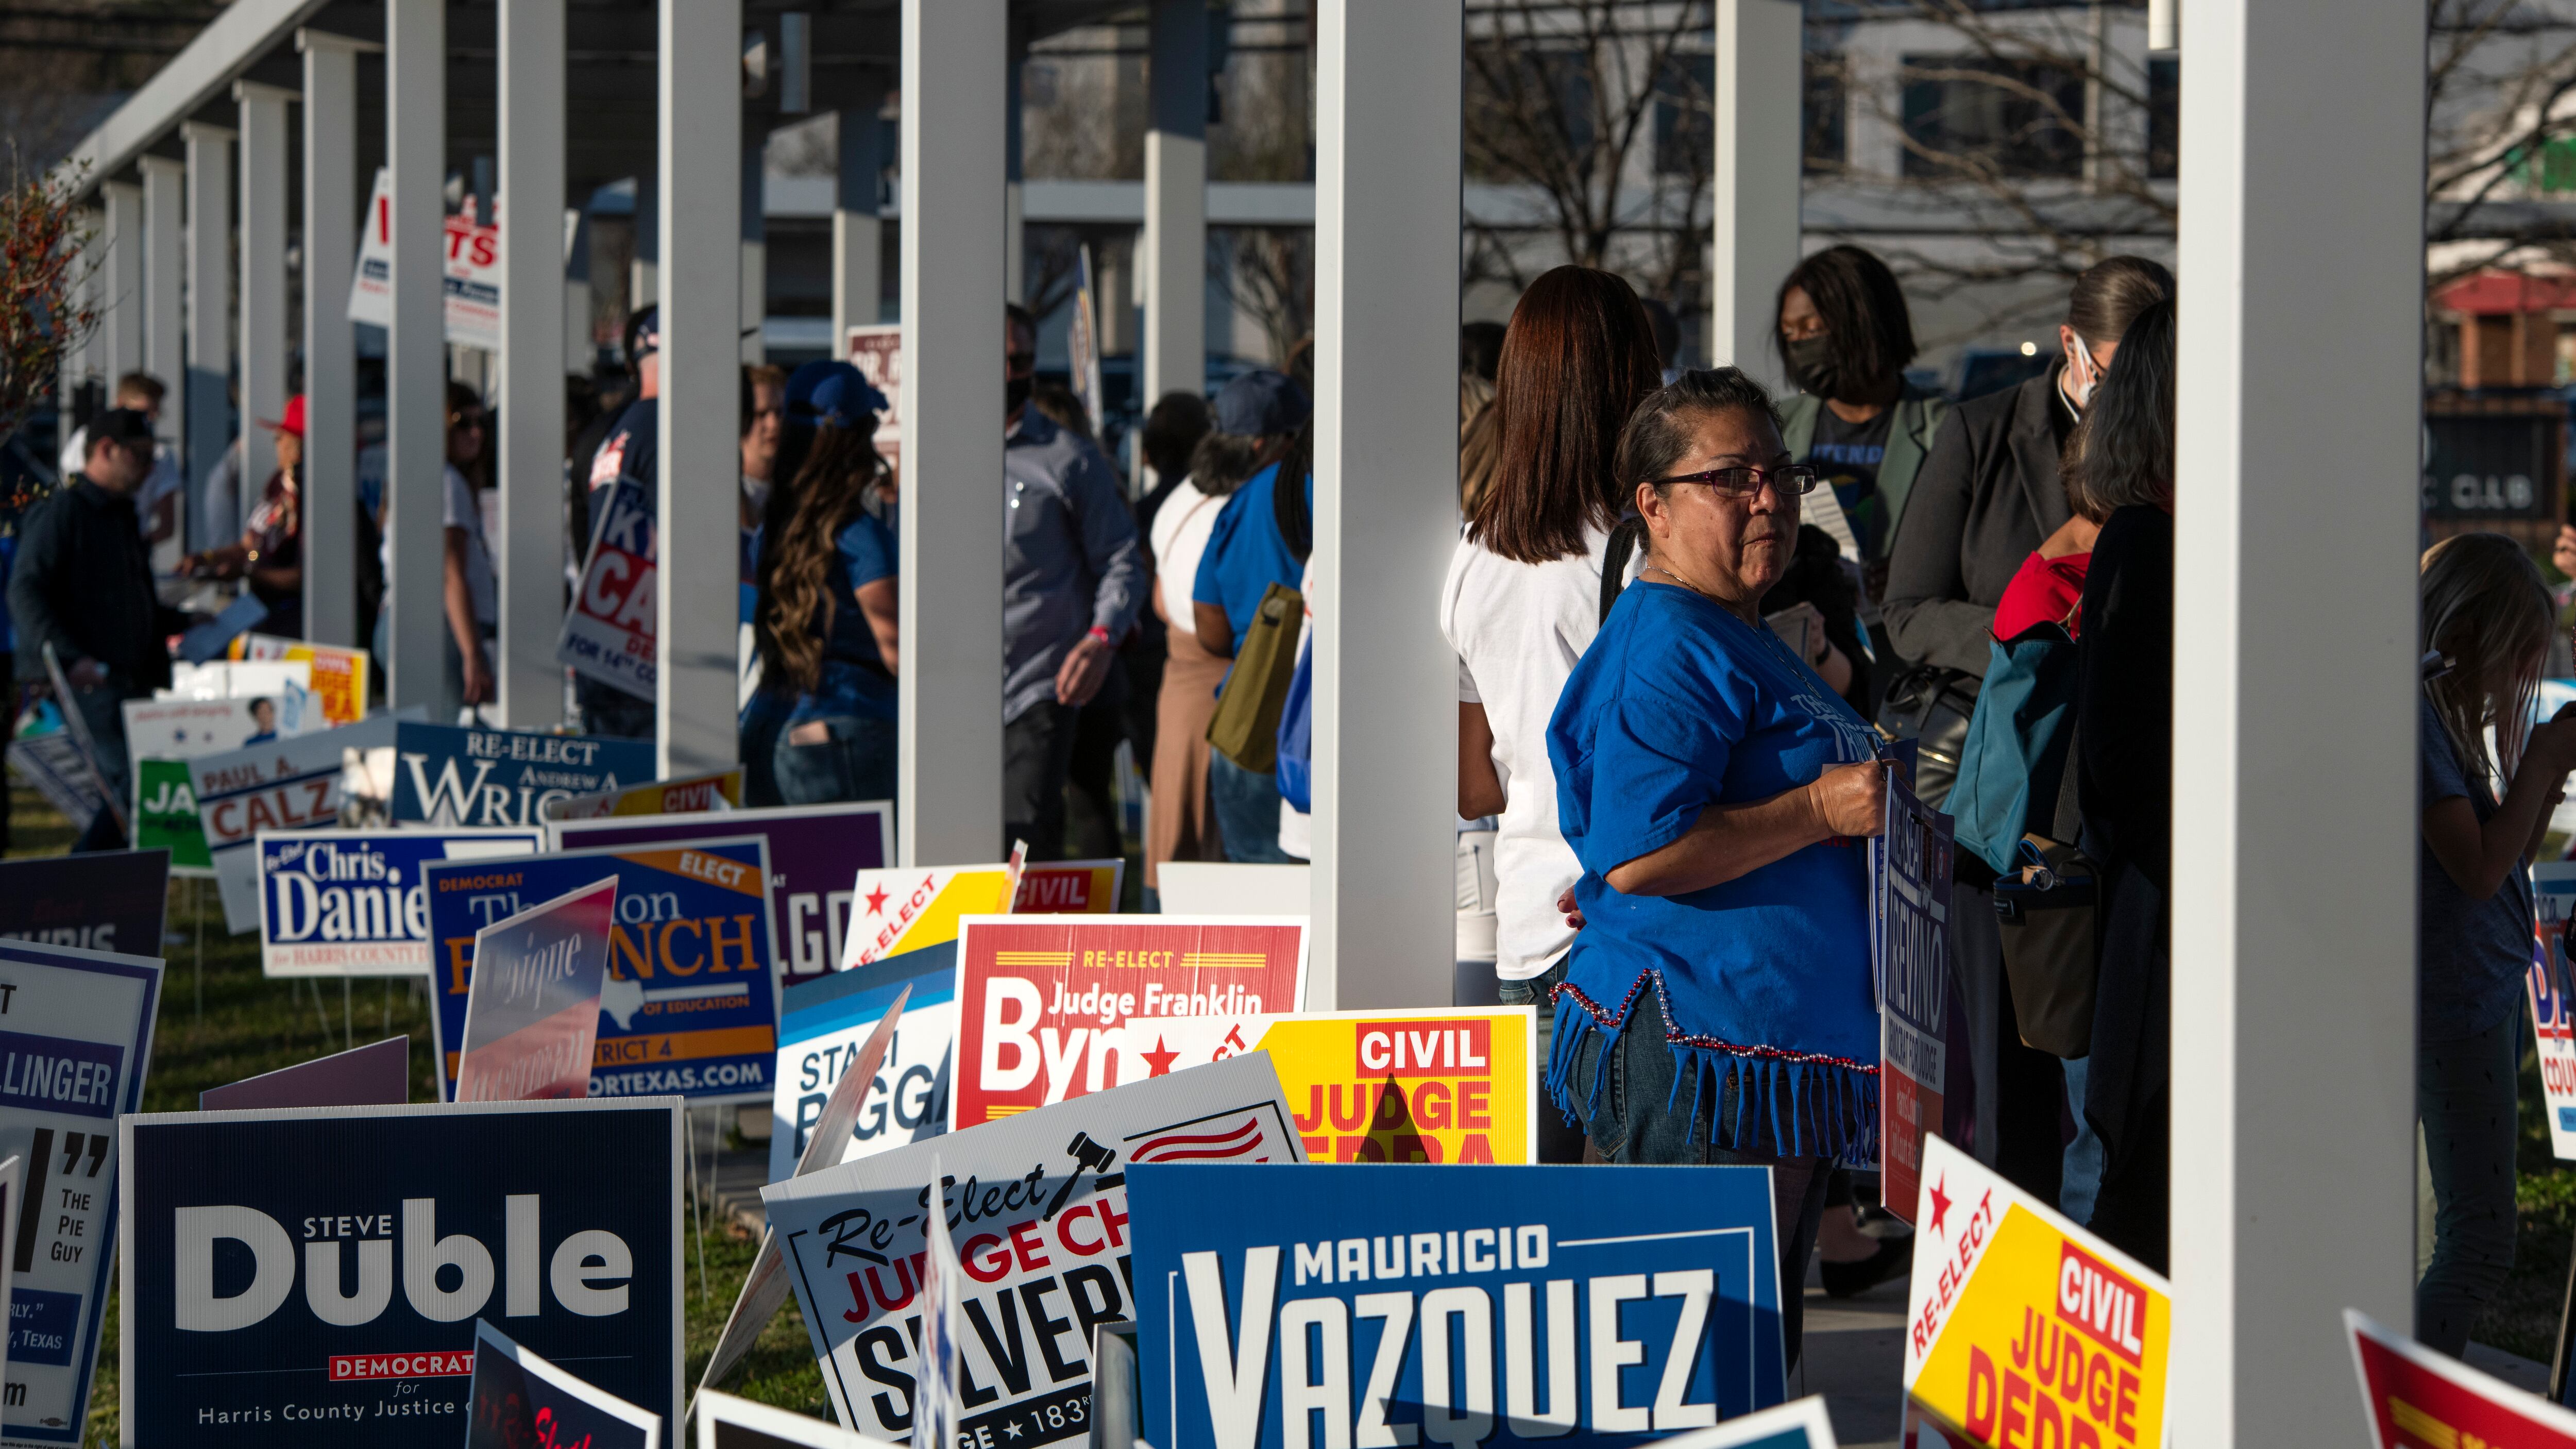 A woman looks over her shoulder in a long line surrounded by campaign signs